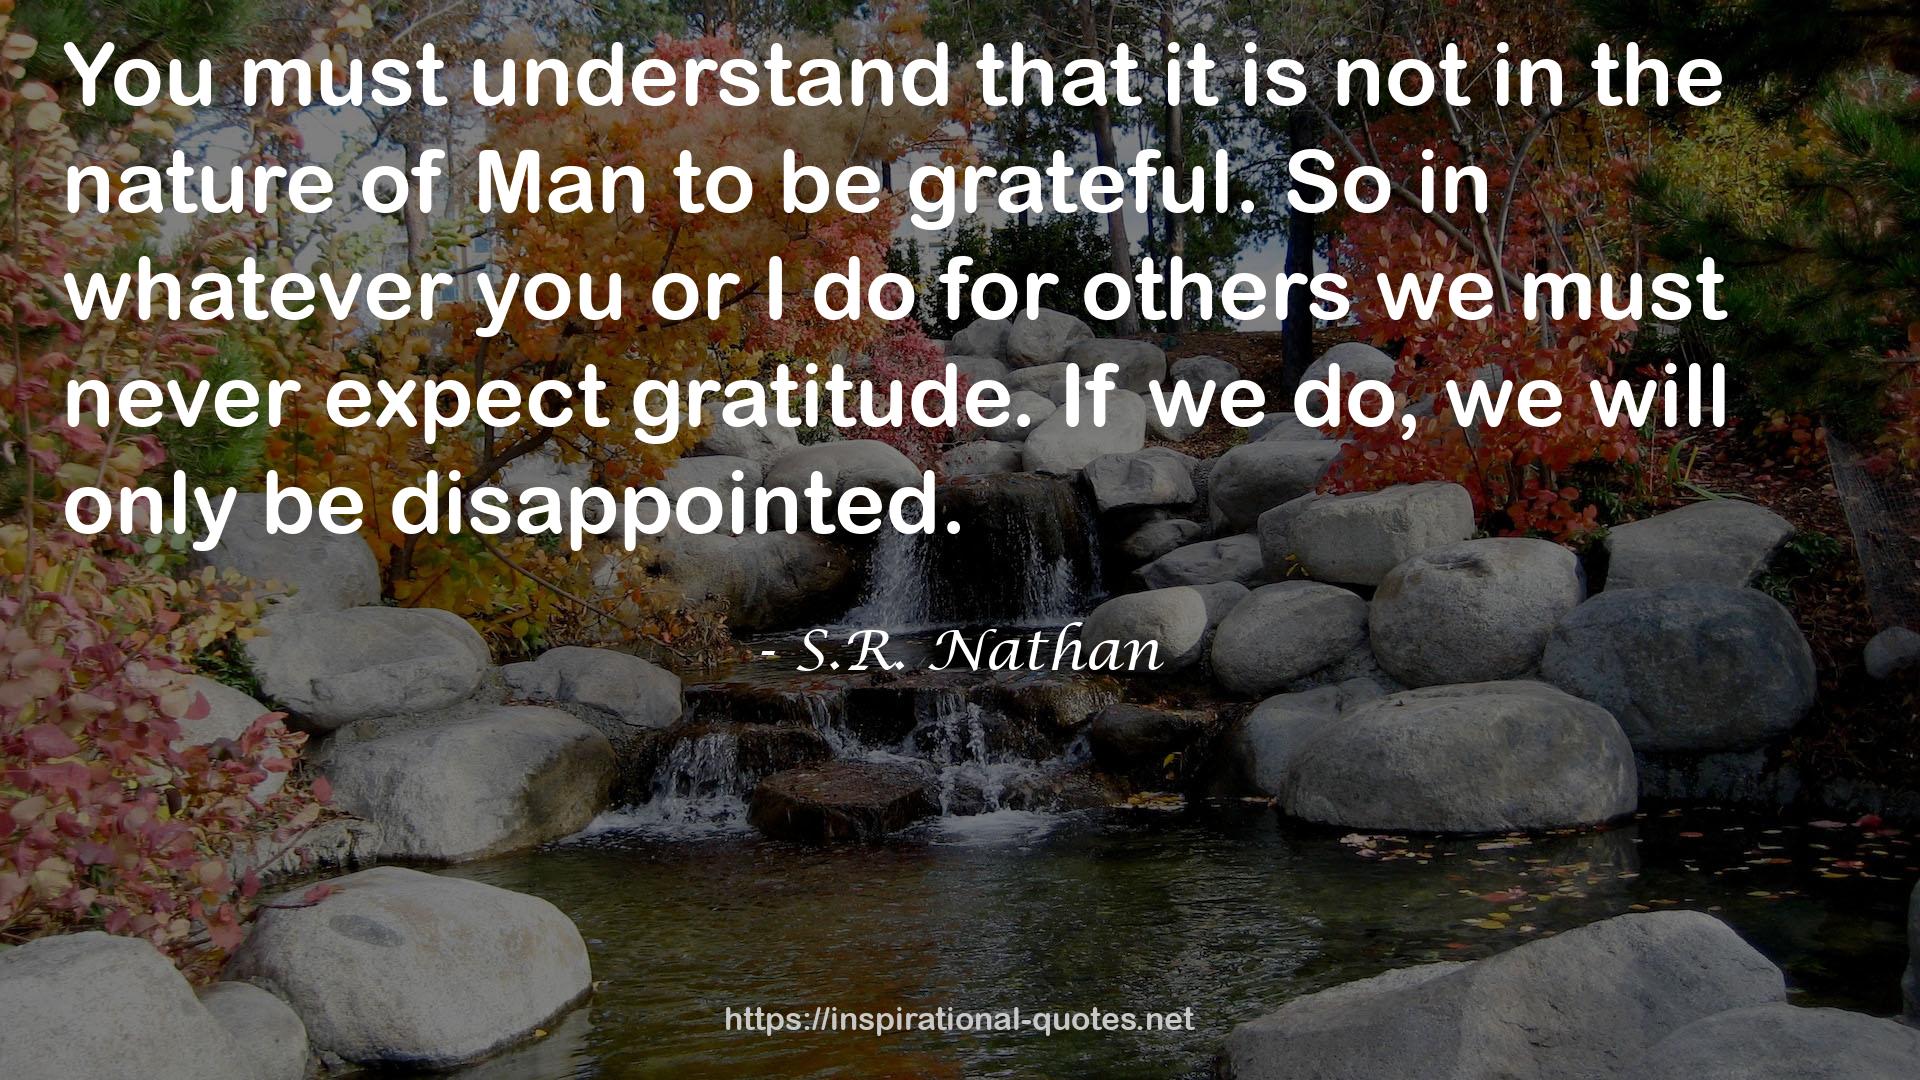 S.R. Nathan QUOTES